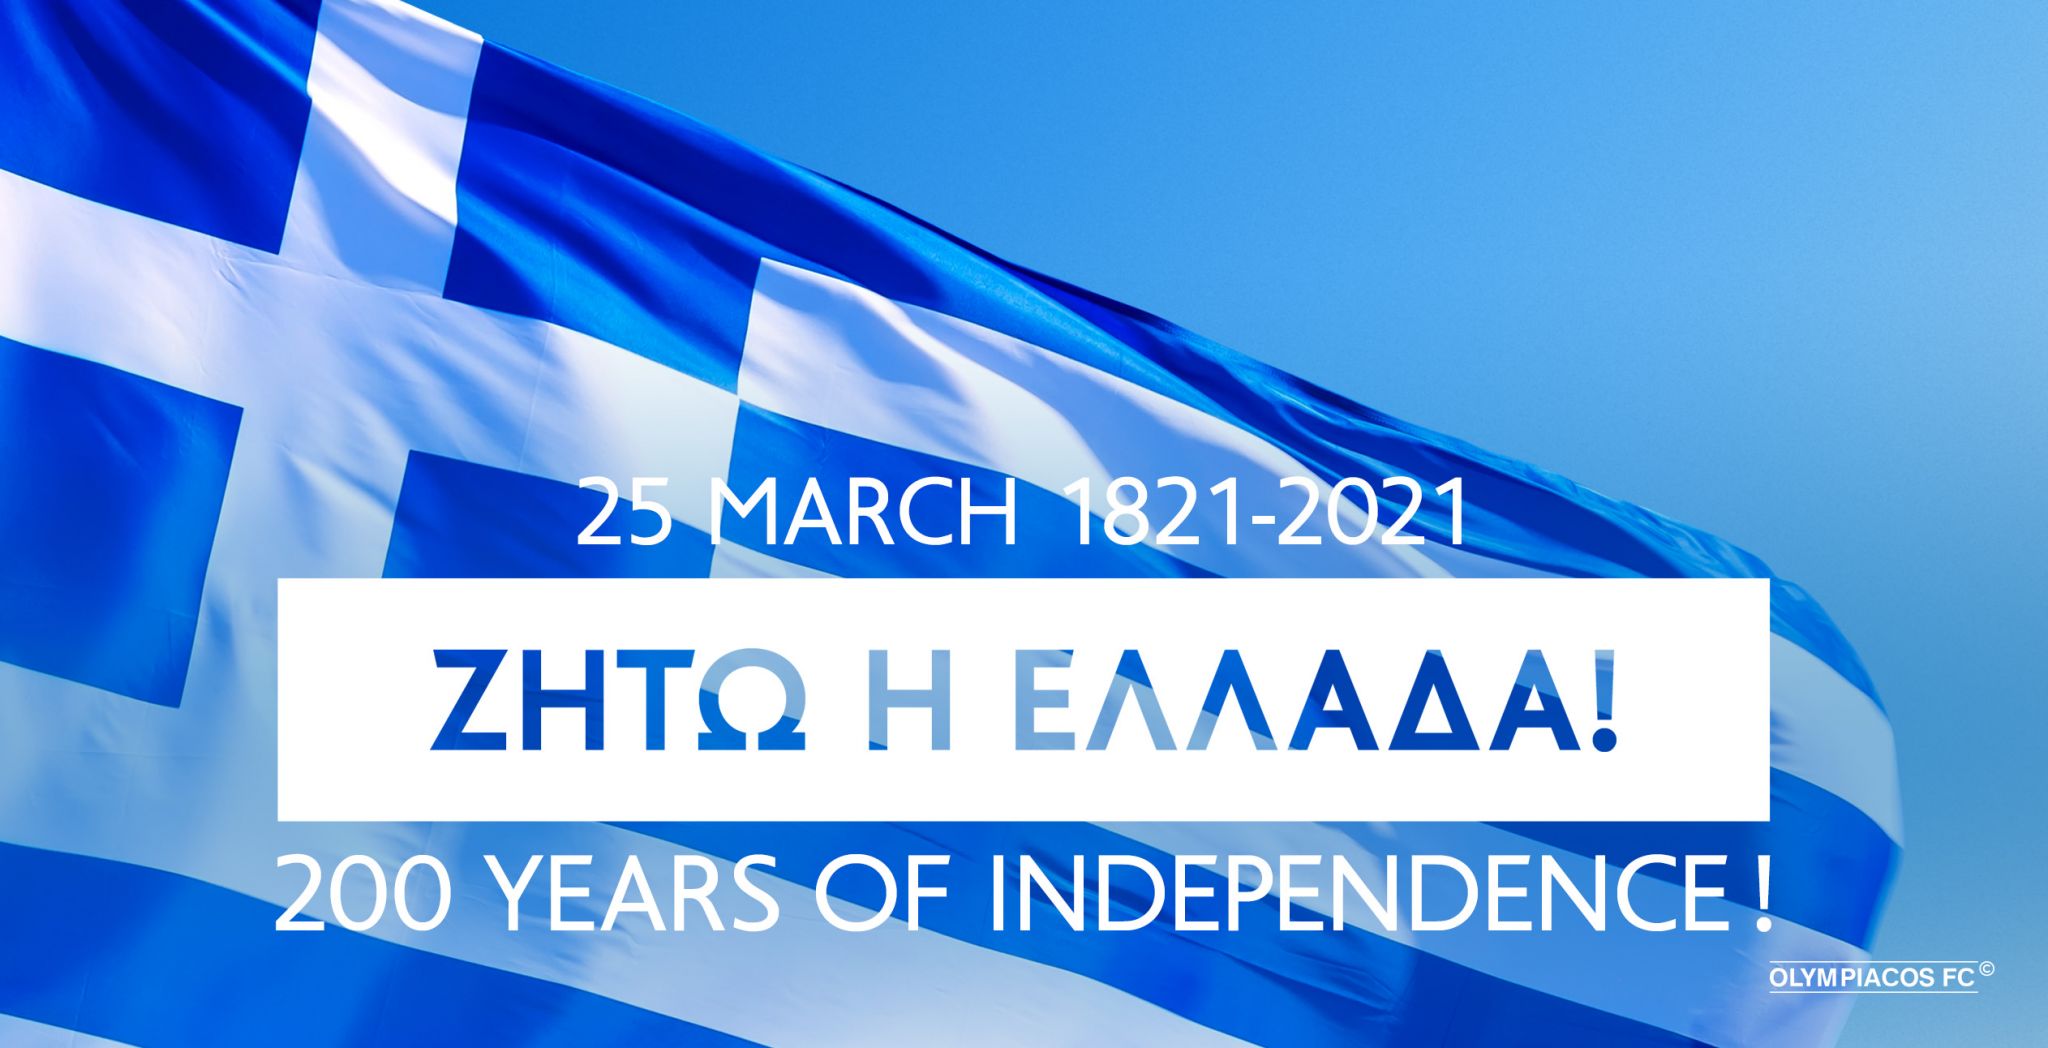 Message by Evangelos Marinakis on the occasion of the Greek Independence Day (March 25th)